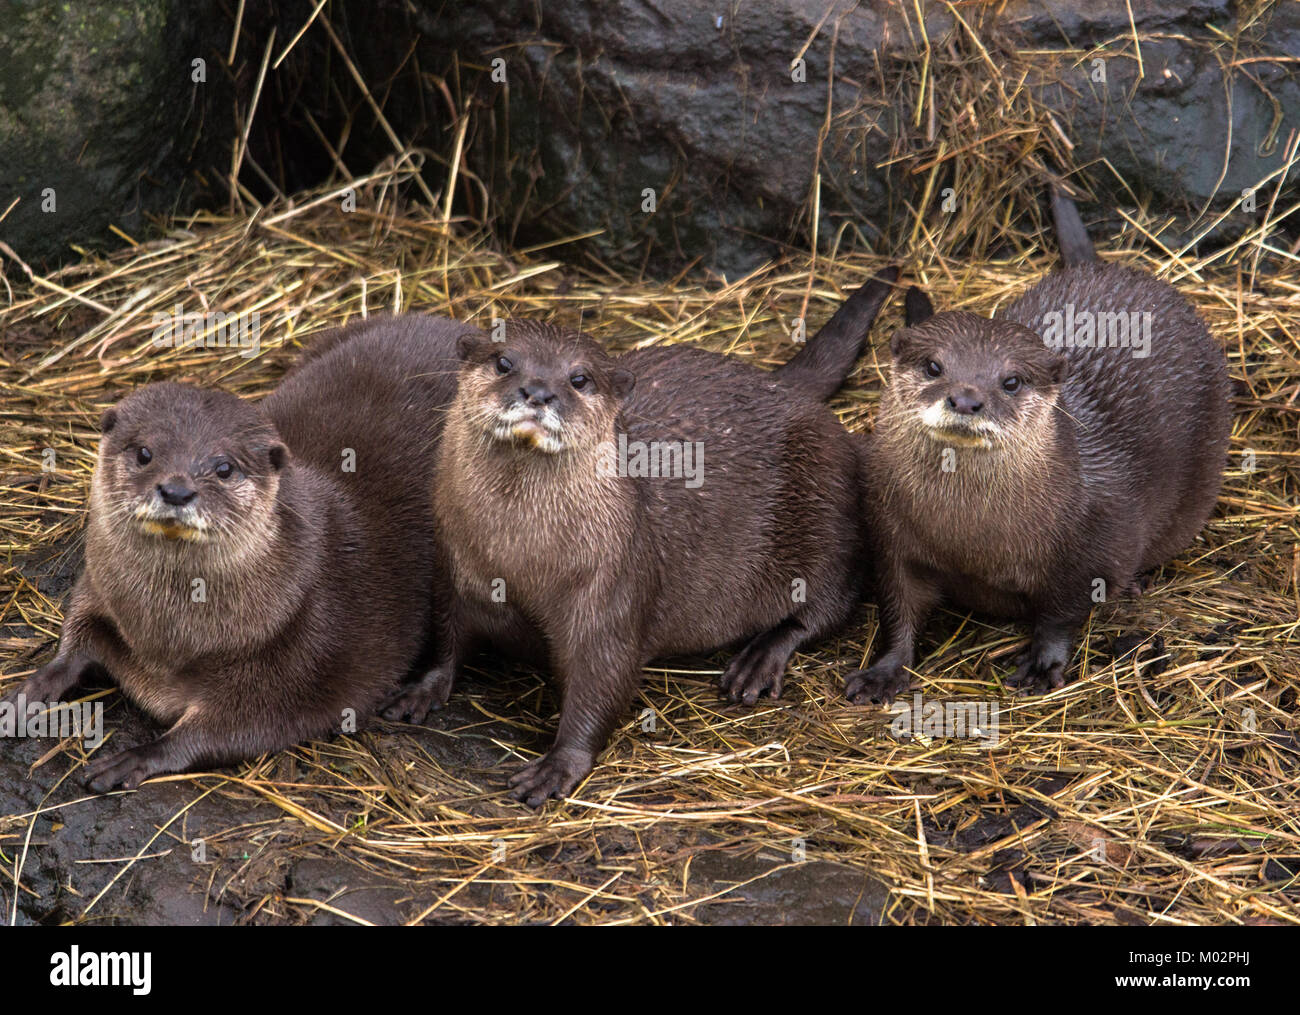 Family of Otters Resting on a bed of Straw - Three muddy, wet otters resting in their nest Stock Photo